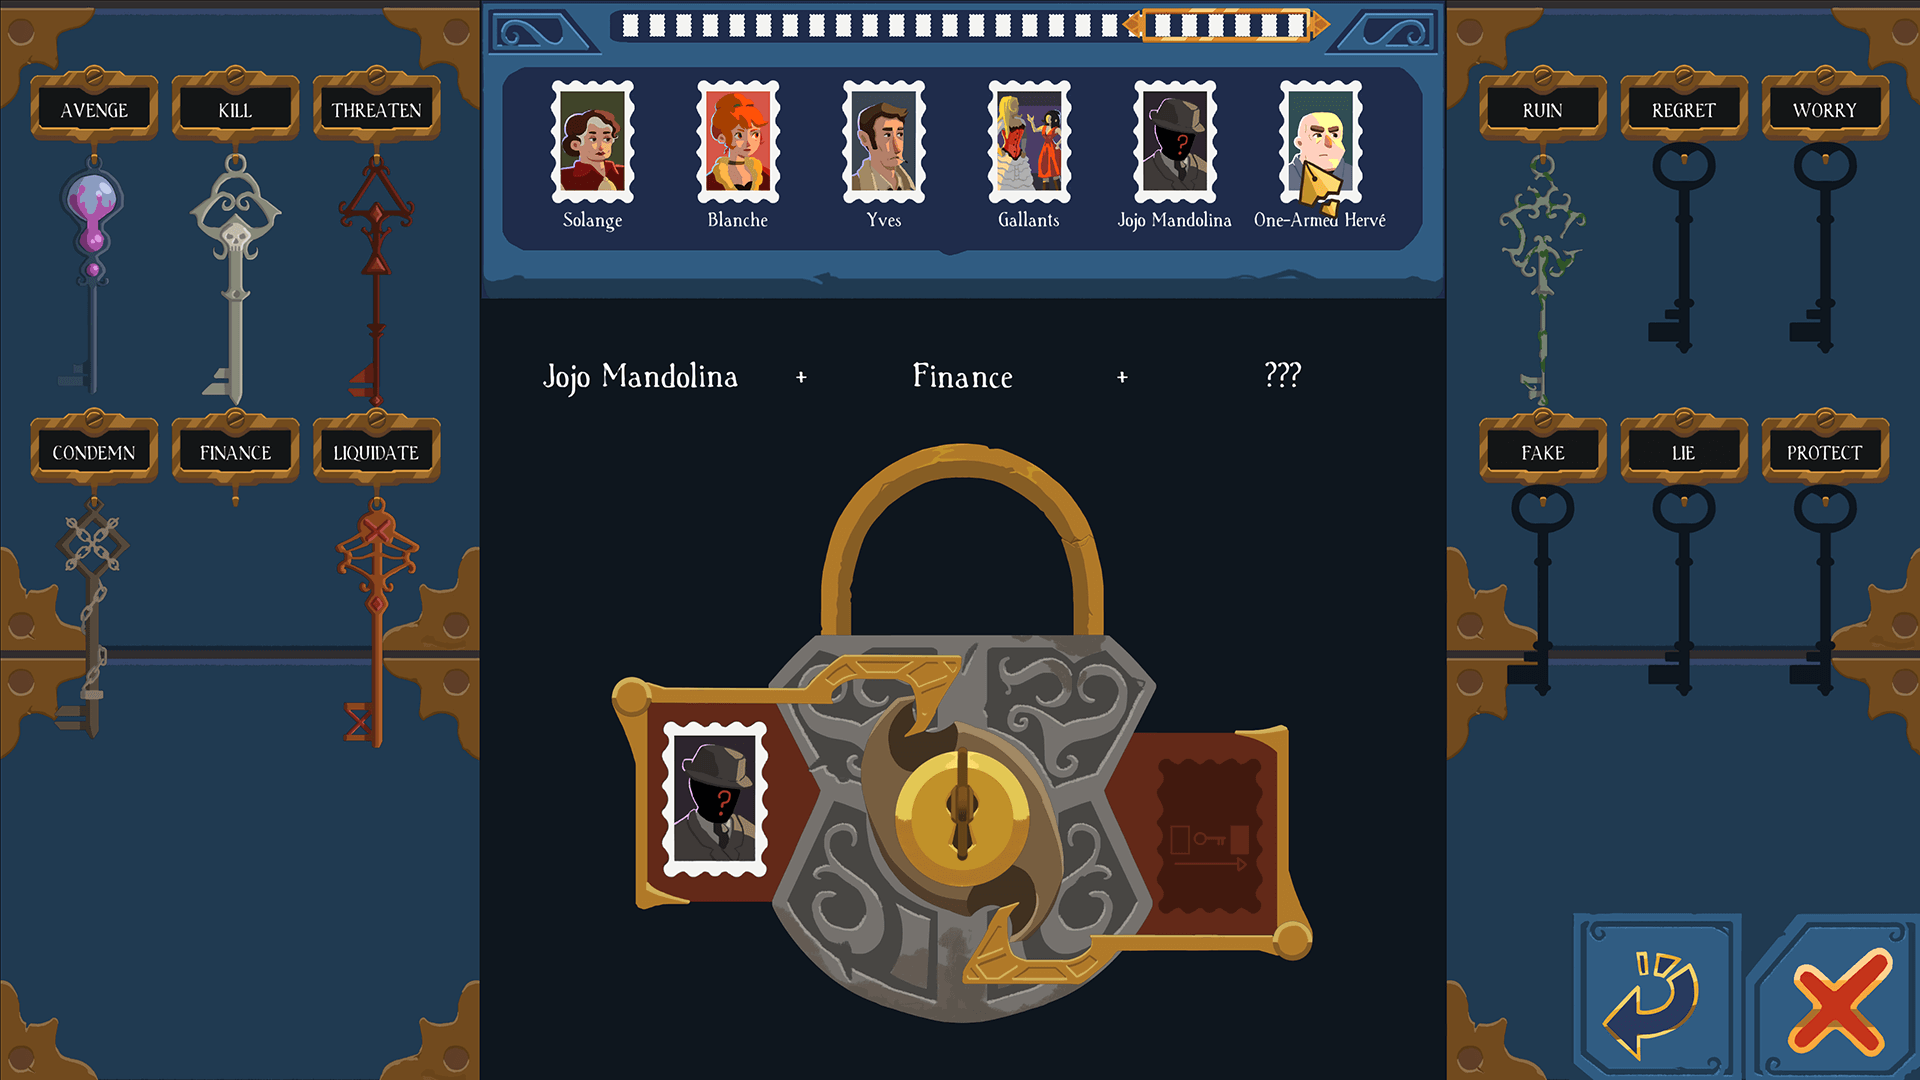 A padlock with two entry points and a list of characters. There are keys hanging on either side of the padlock that can be used to unlock the link and allow players access to the final confrontation.